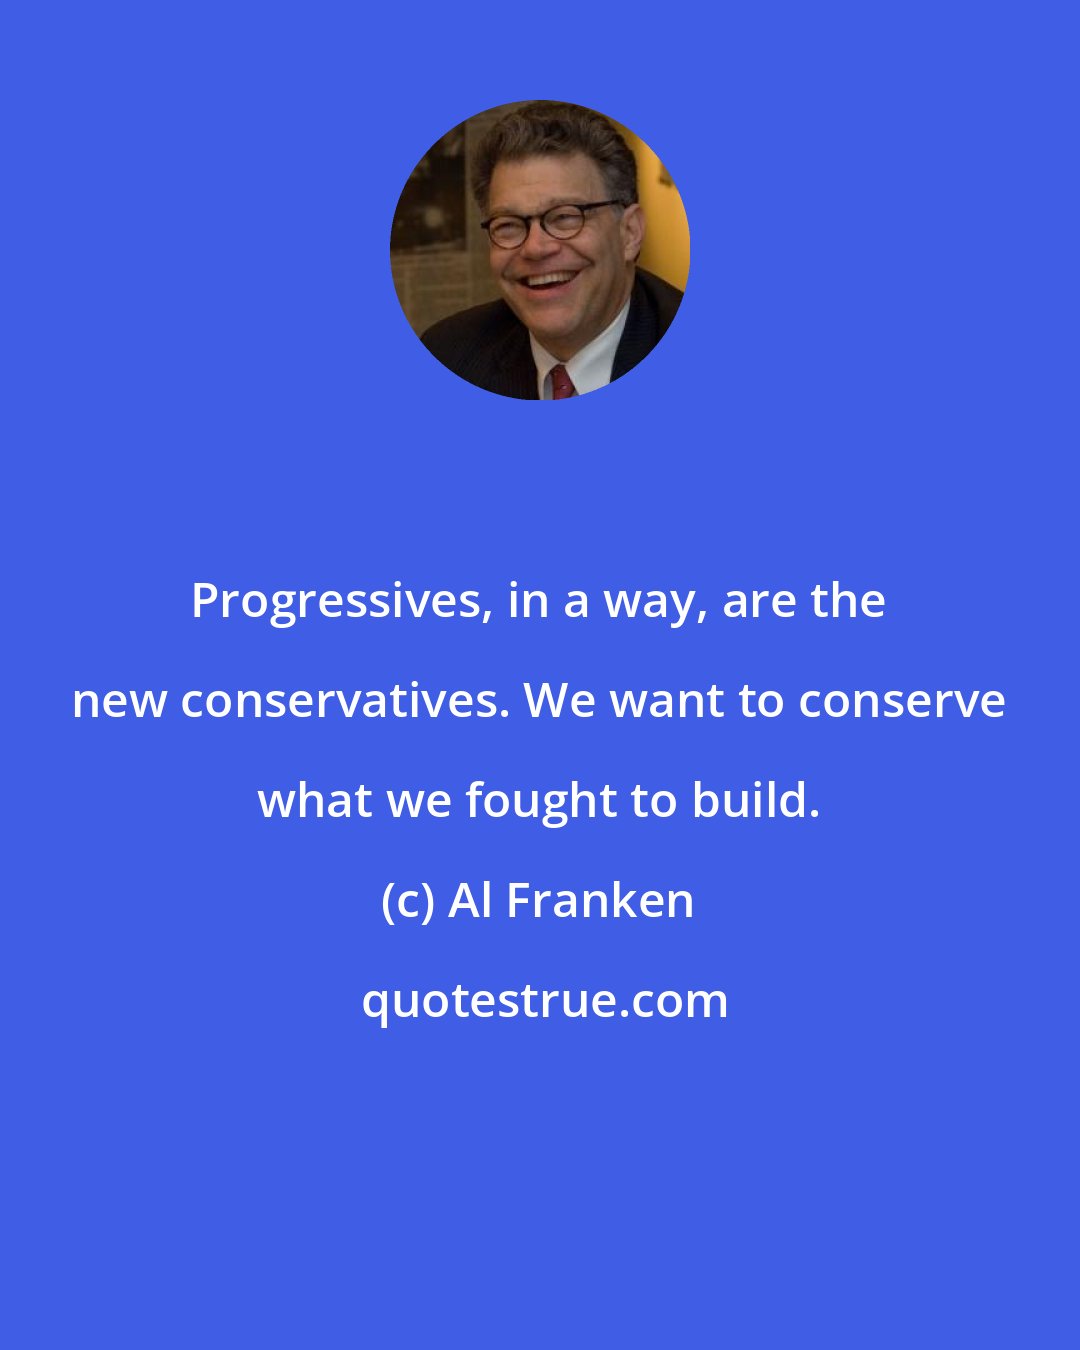 Al Franken: Progressives, in a way, are the new conservatives. We want to conserve what we fought to build.